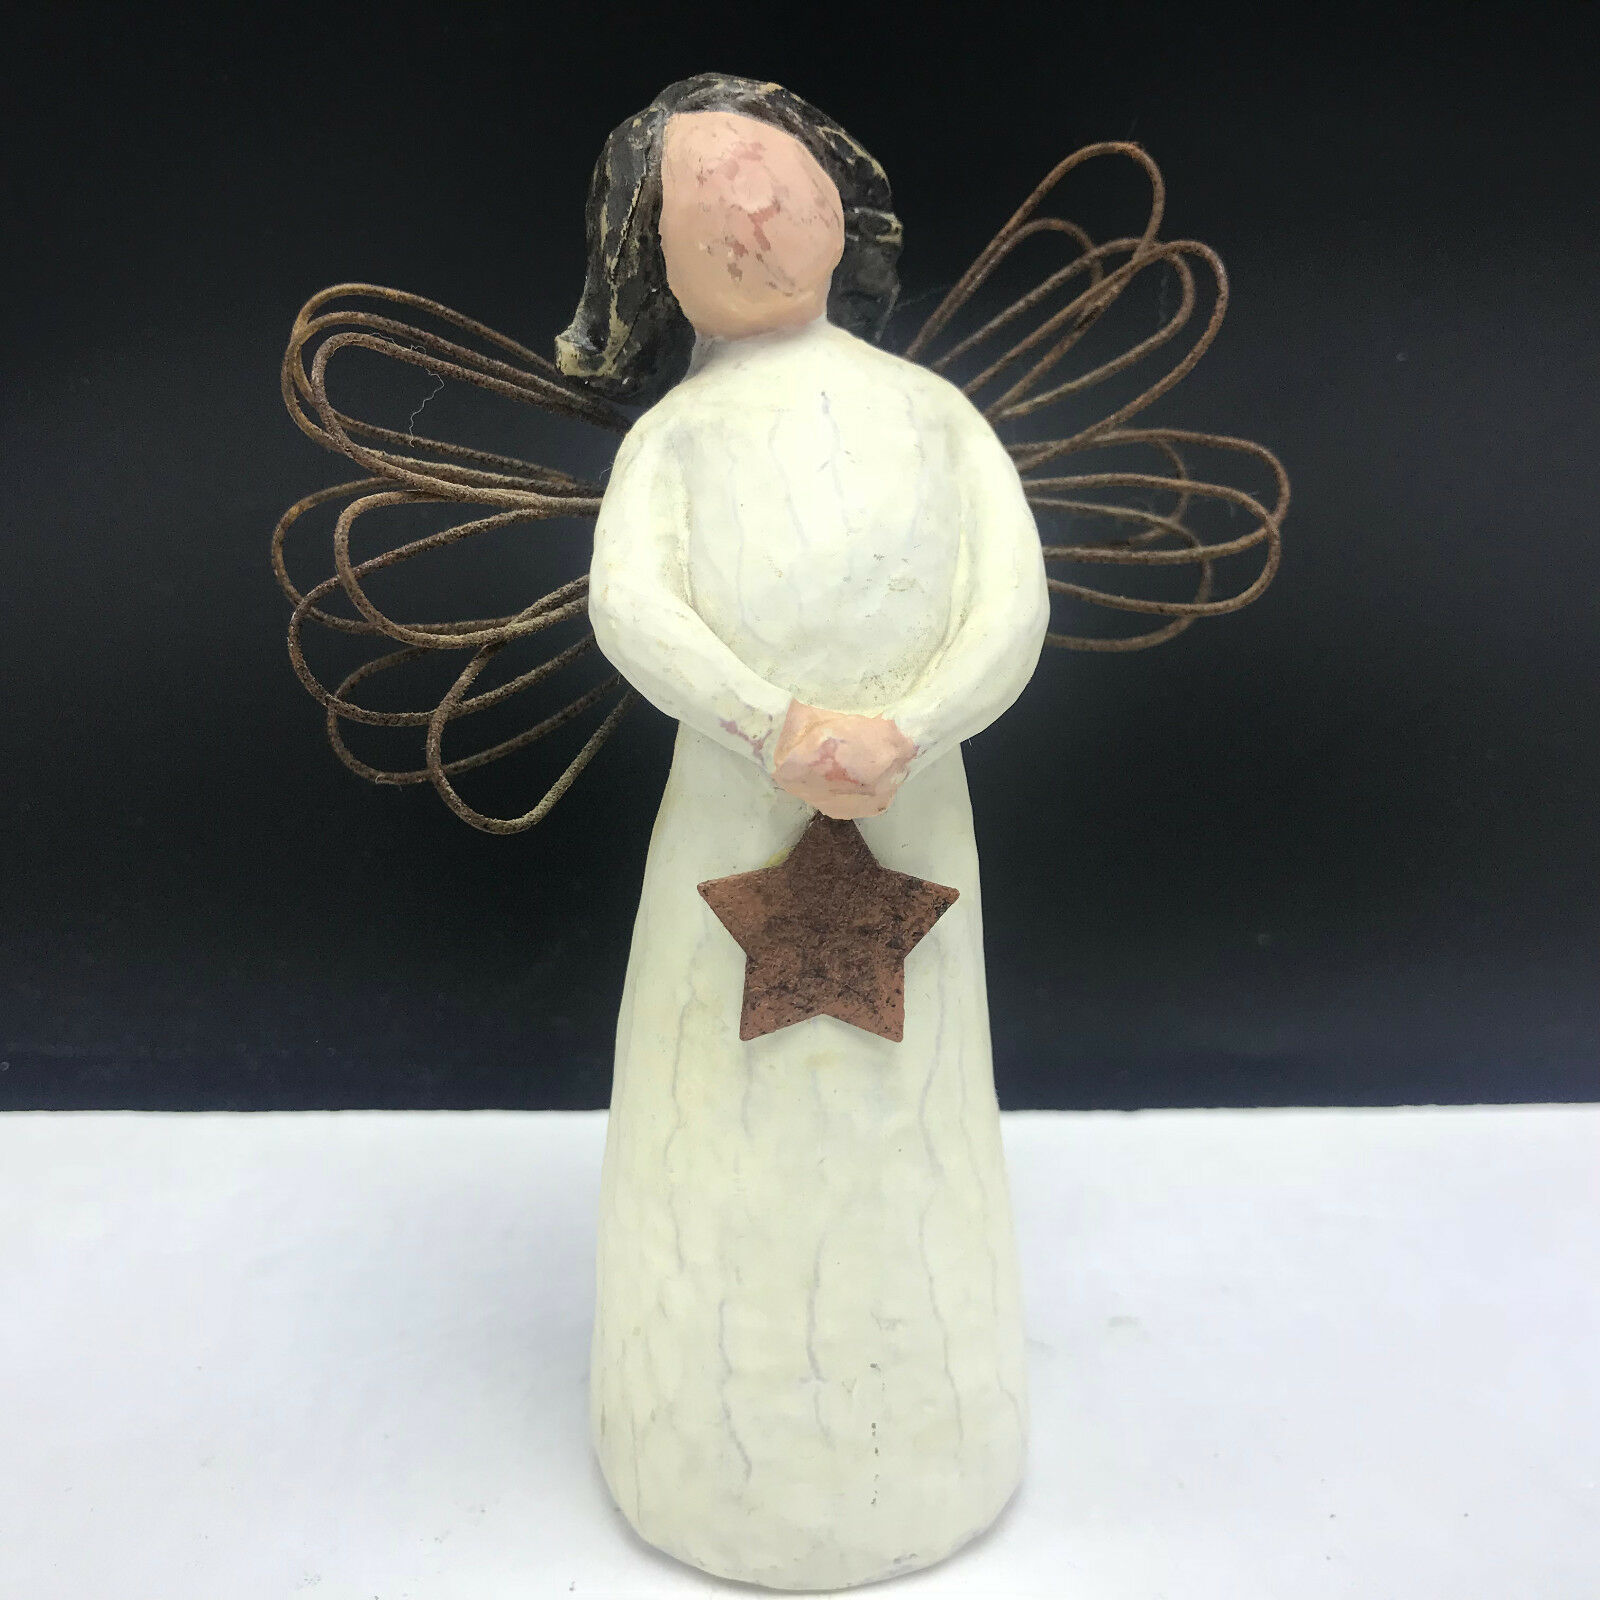 Primary image for WILLOW TREE FIGURINE statue sculpture demdaco Angel of Light star wings Lordi